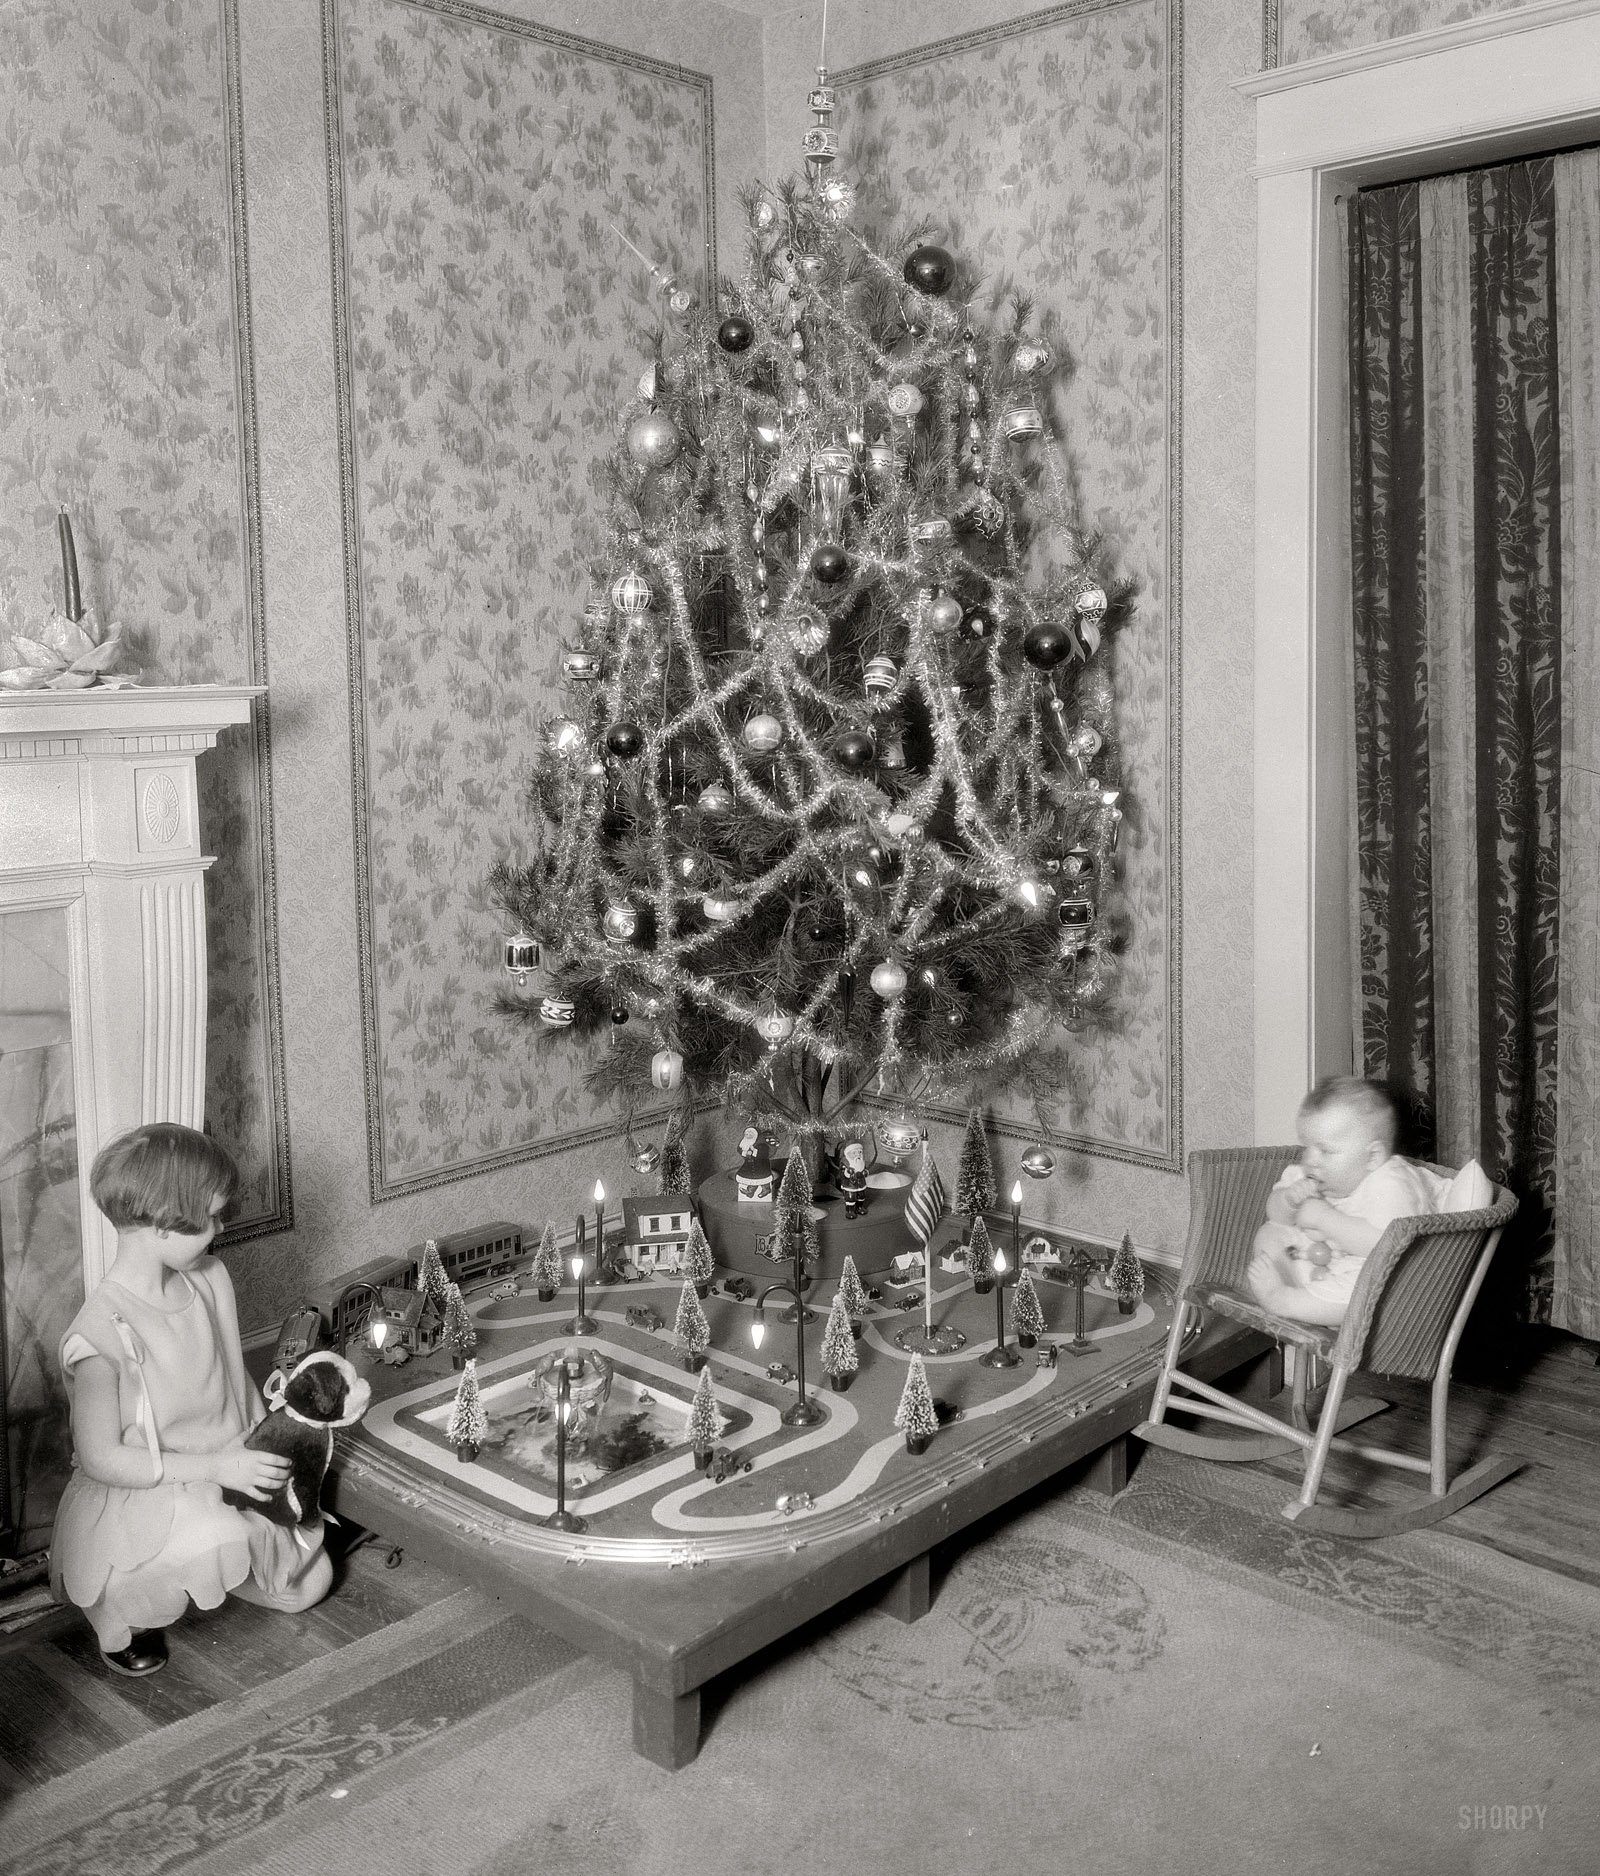 Washington circa 1928. "Christmas tree. No caption information, title devised by library staff." Click here for a closeup of the train set, which has a duck pond and a birdbath. National Photo Company Collection glass negative. View full size.